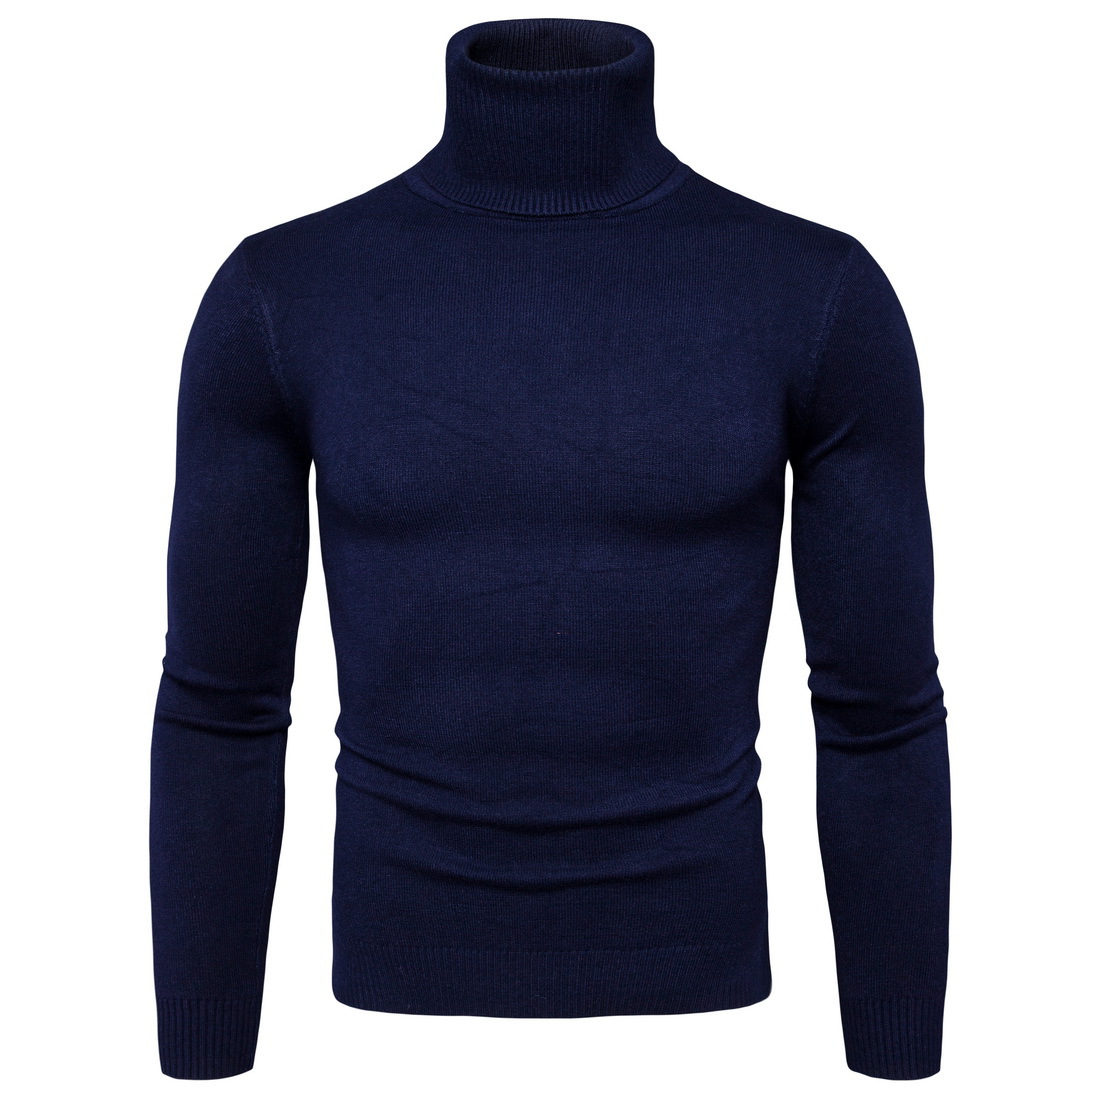 Men Knitted Sweater Autumn Winter Turtleneck Long Sleeve Casual Slim Pullover Tops Navy Blue